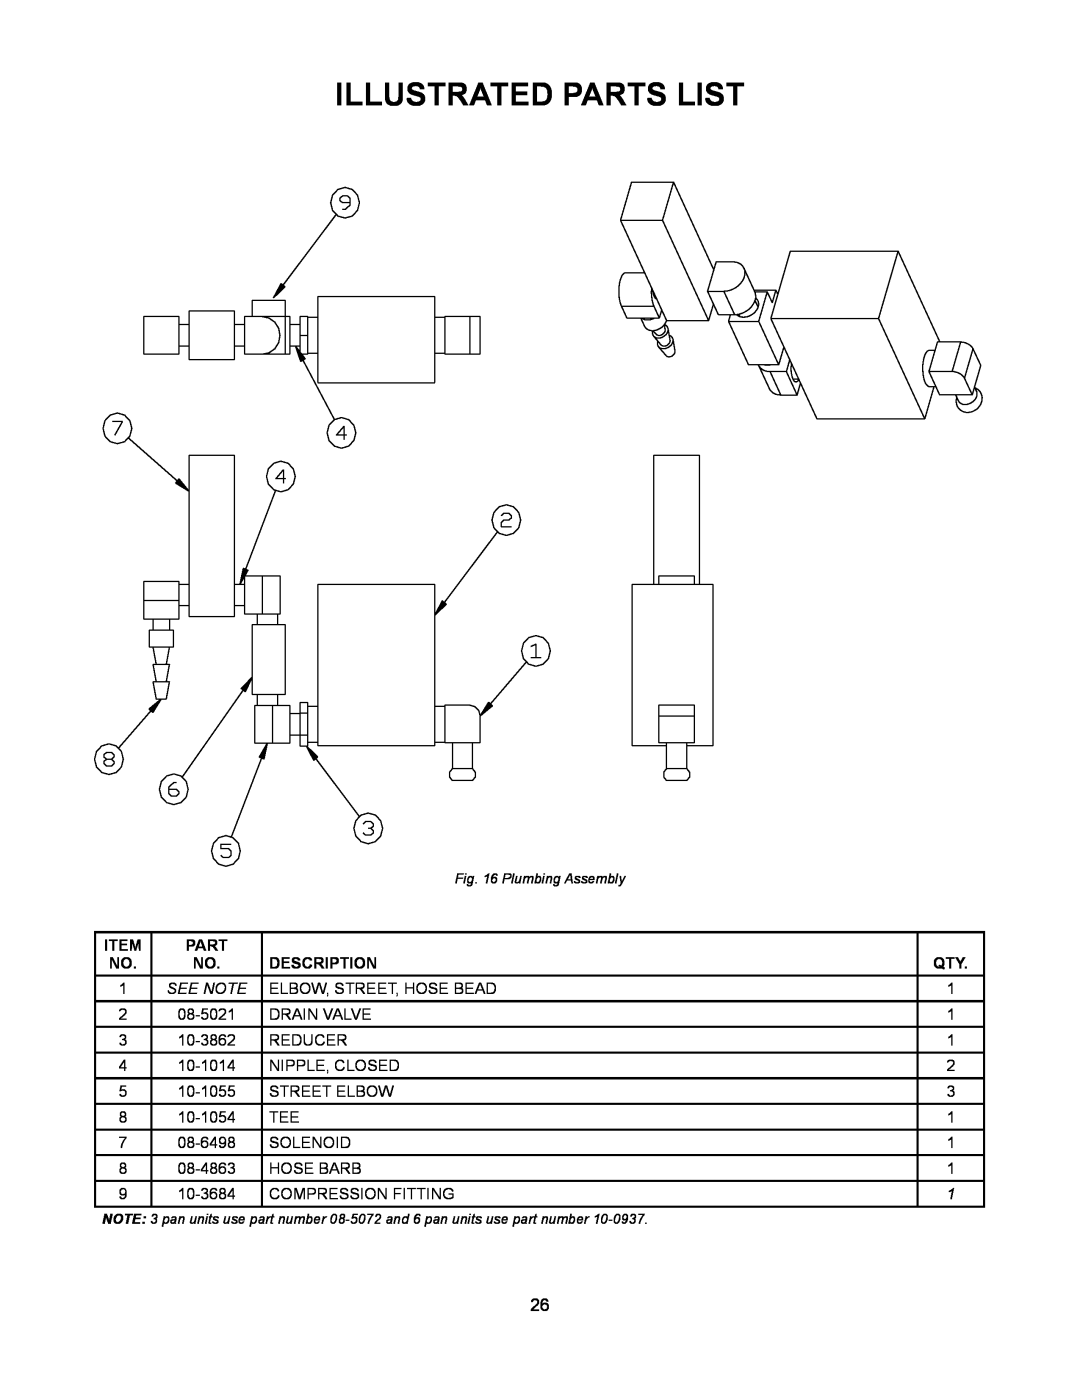 Market Forge Industries ST-3E, ST-6E, STEAM-TECH ELECTRIC STEAM COOKER manual Illustrated Parts List, Description, See Note 